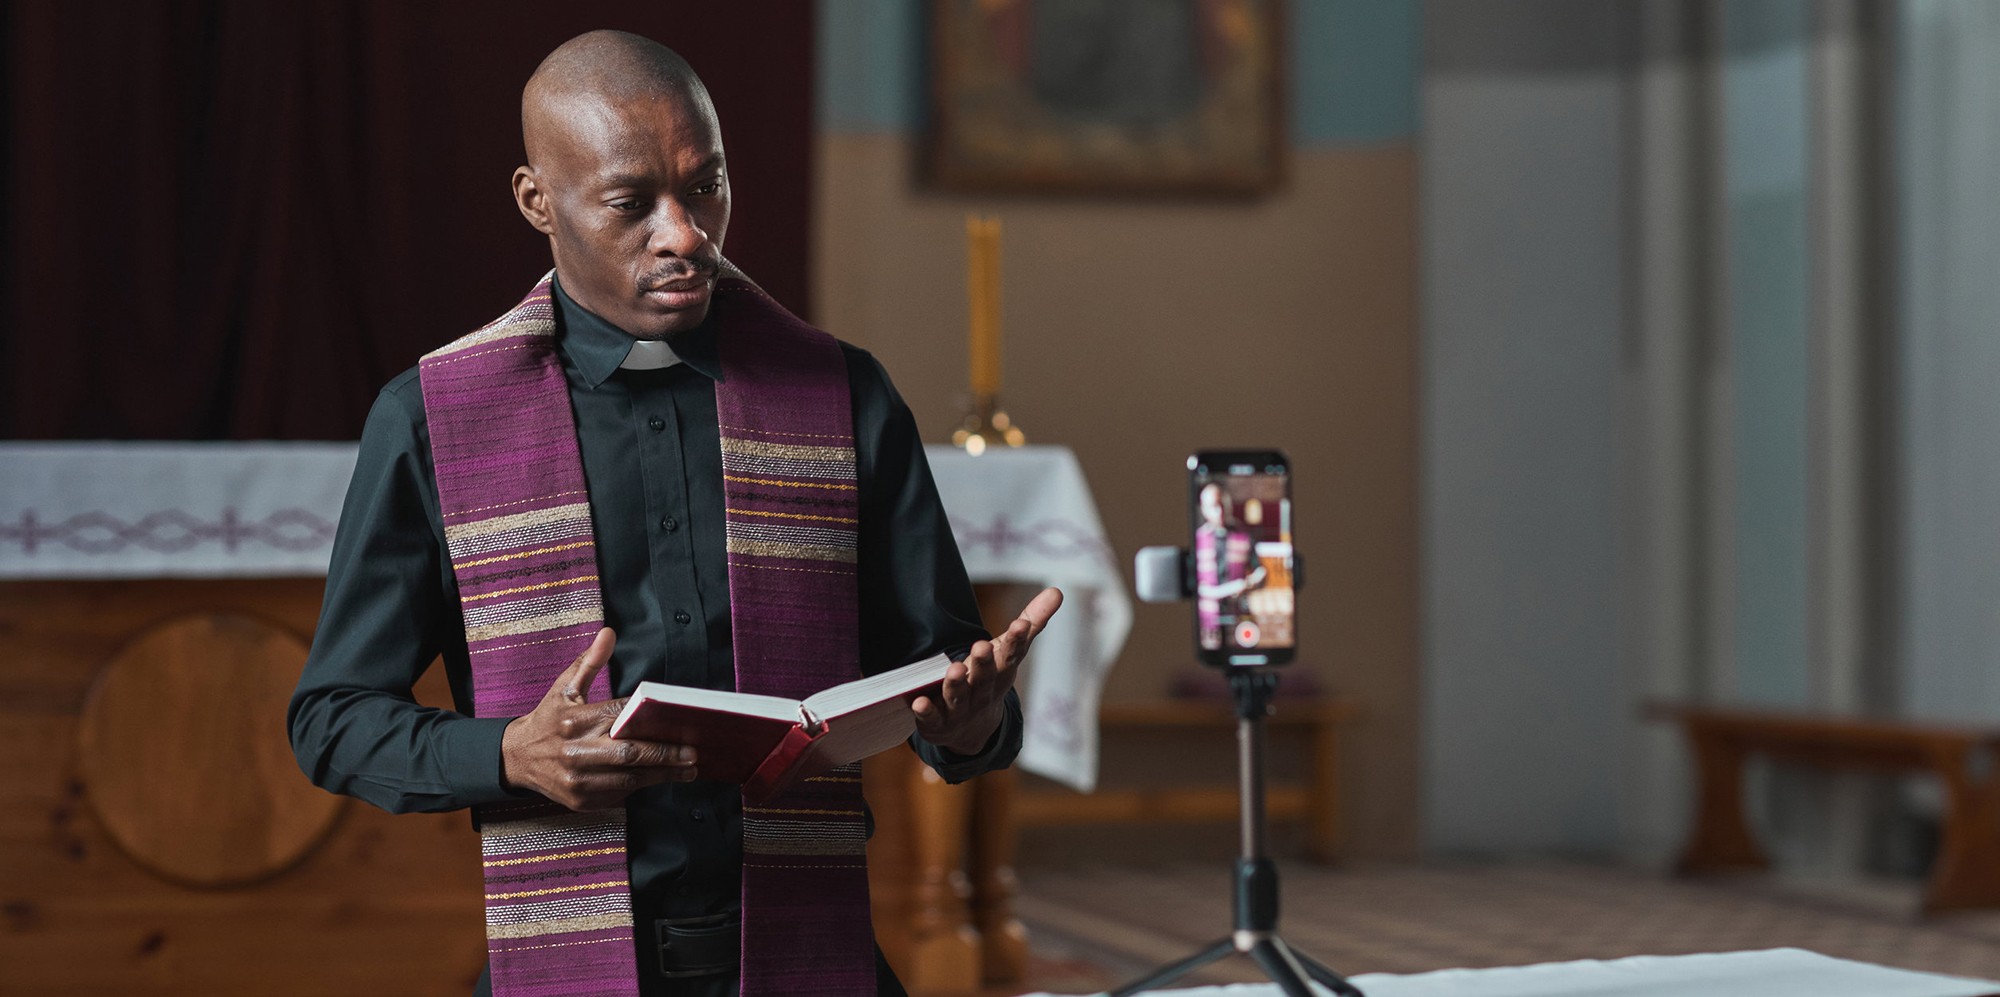 Technology in the Black Church